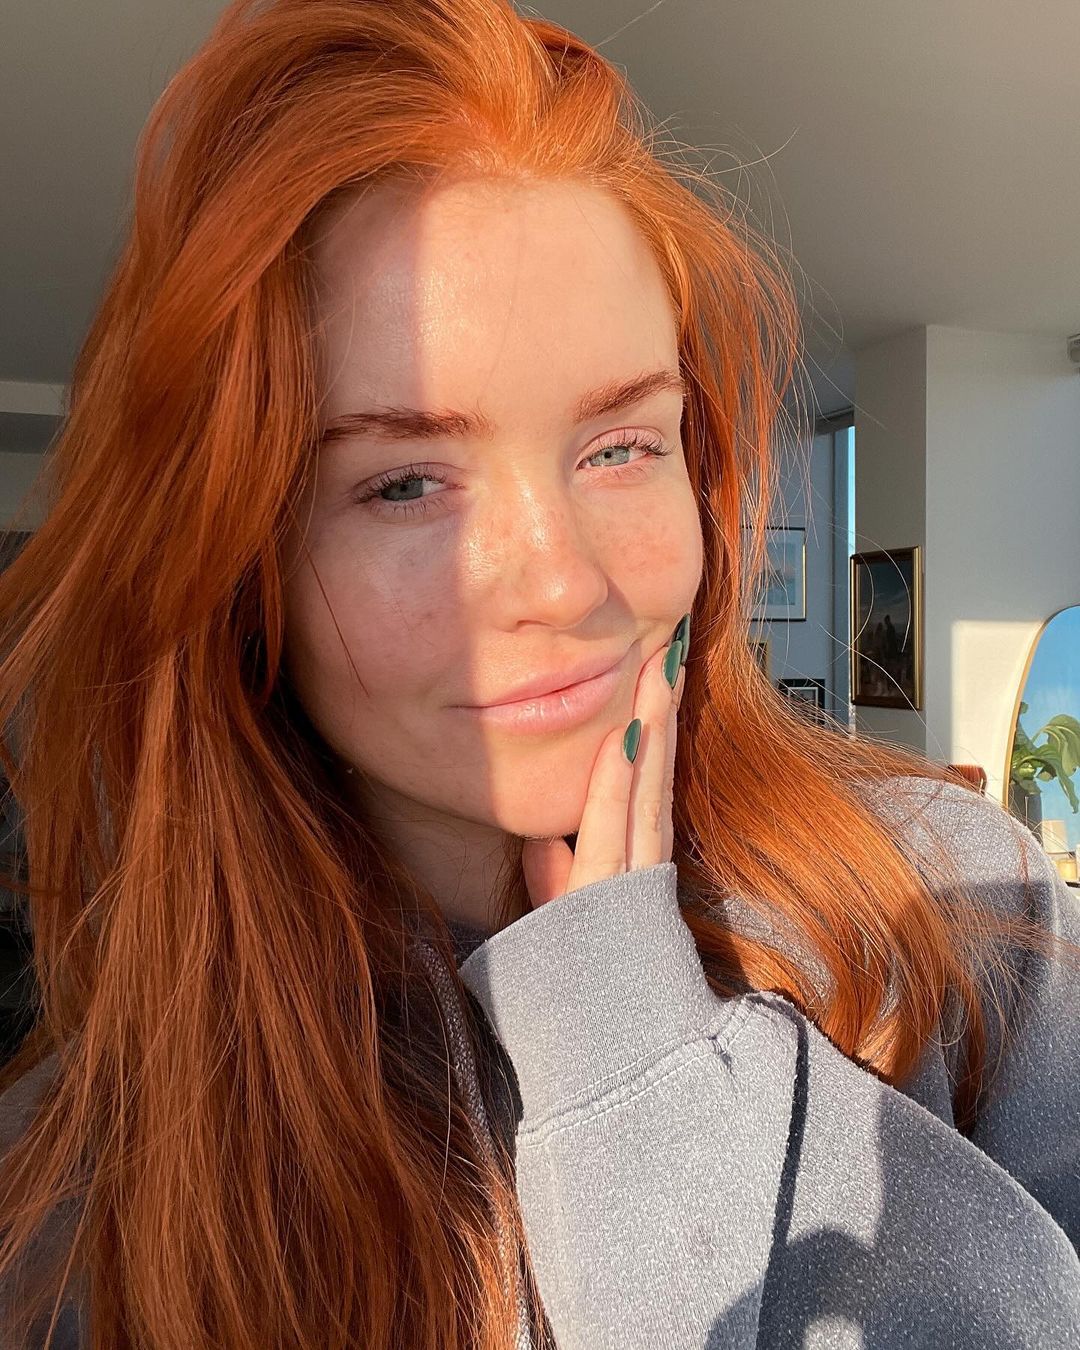 A person basking in the warm glow of the setting sun with auburn hair and a contemplative gaze